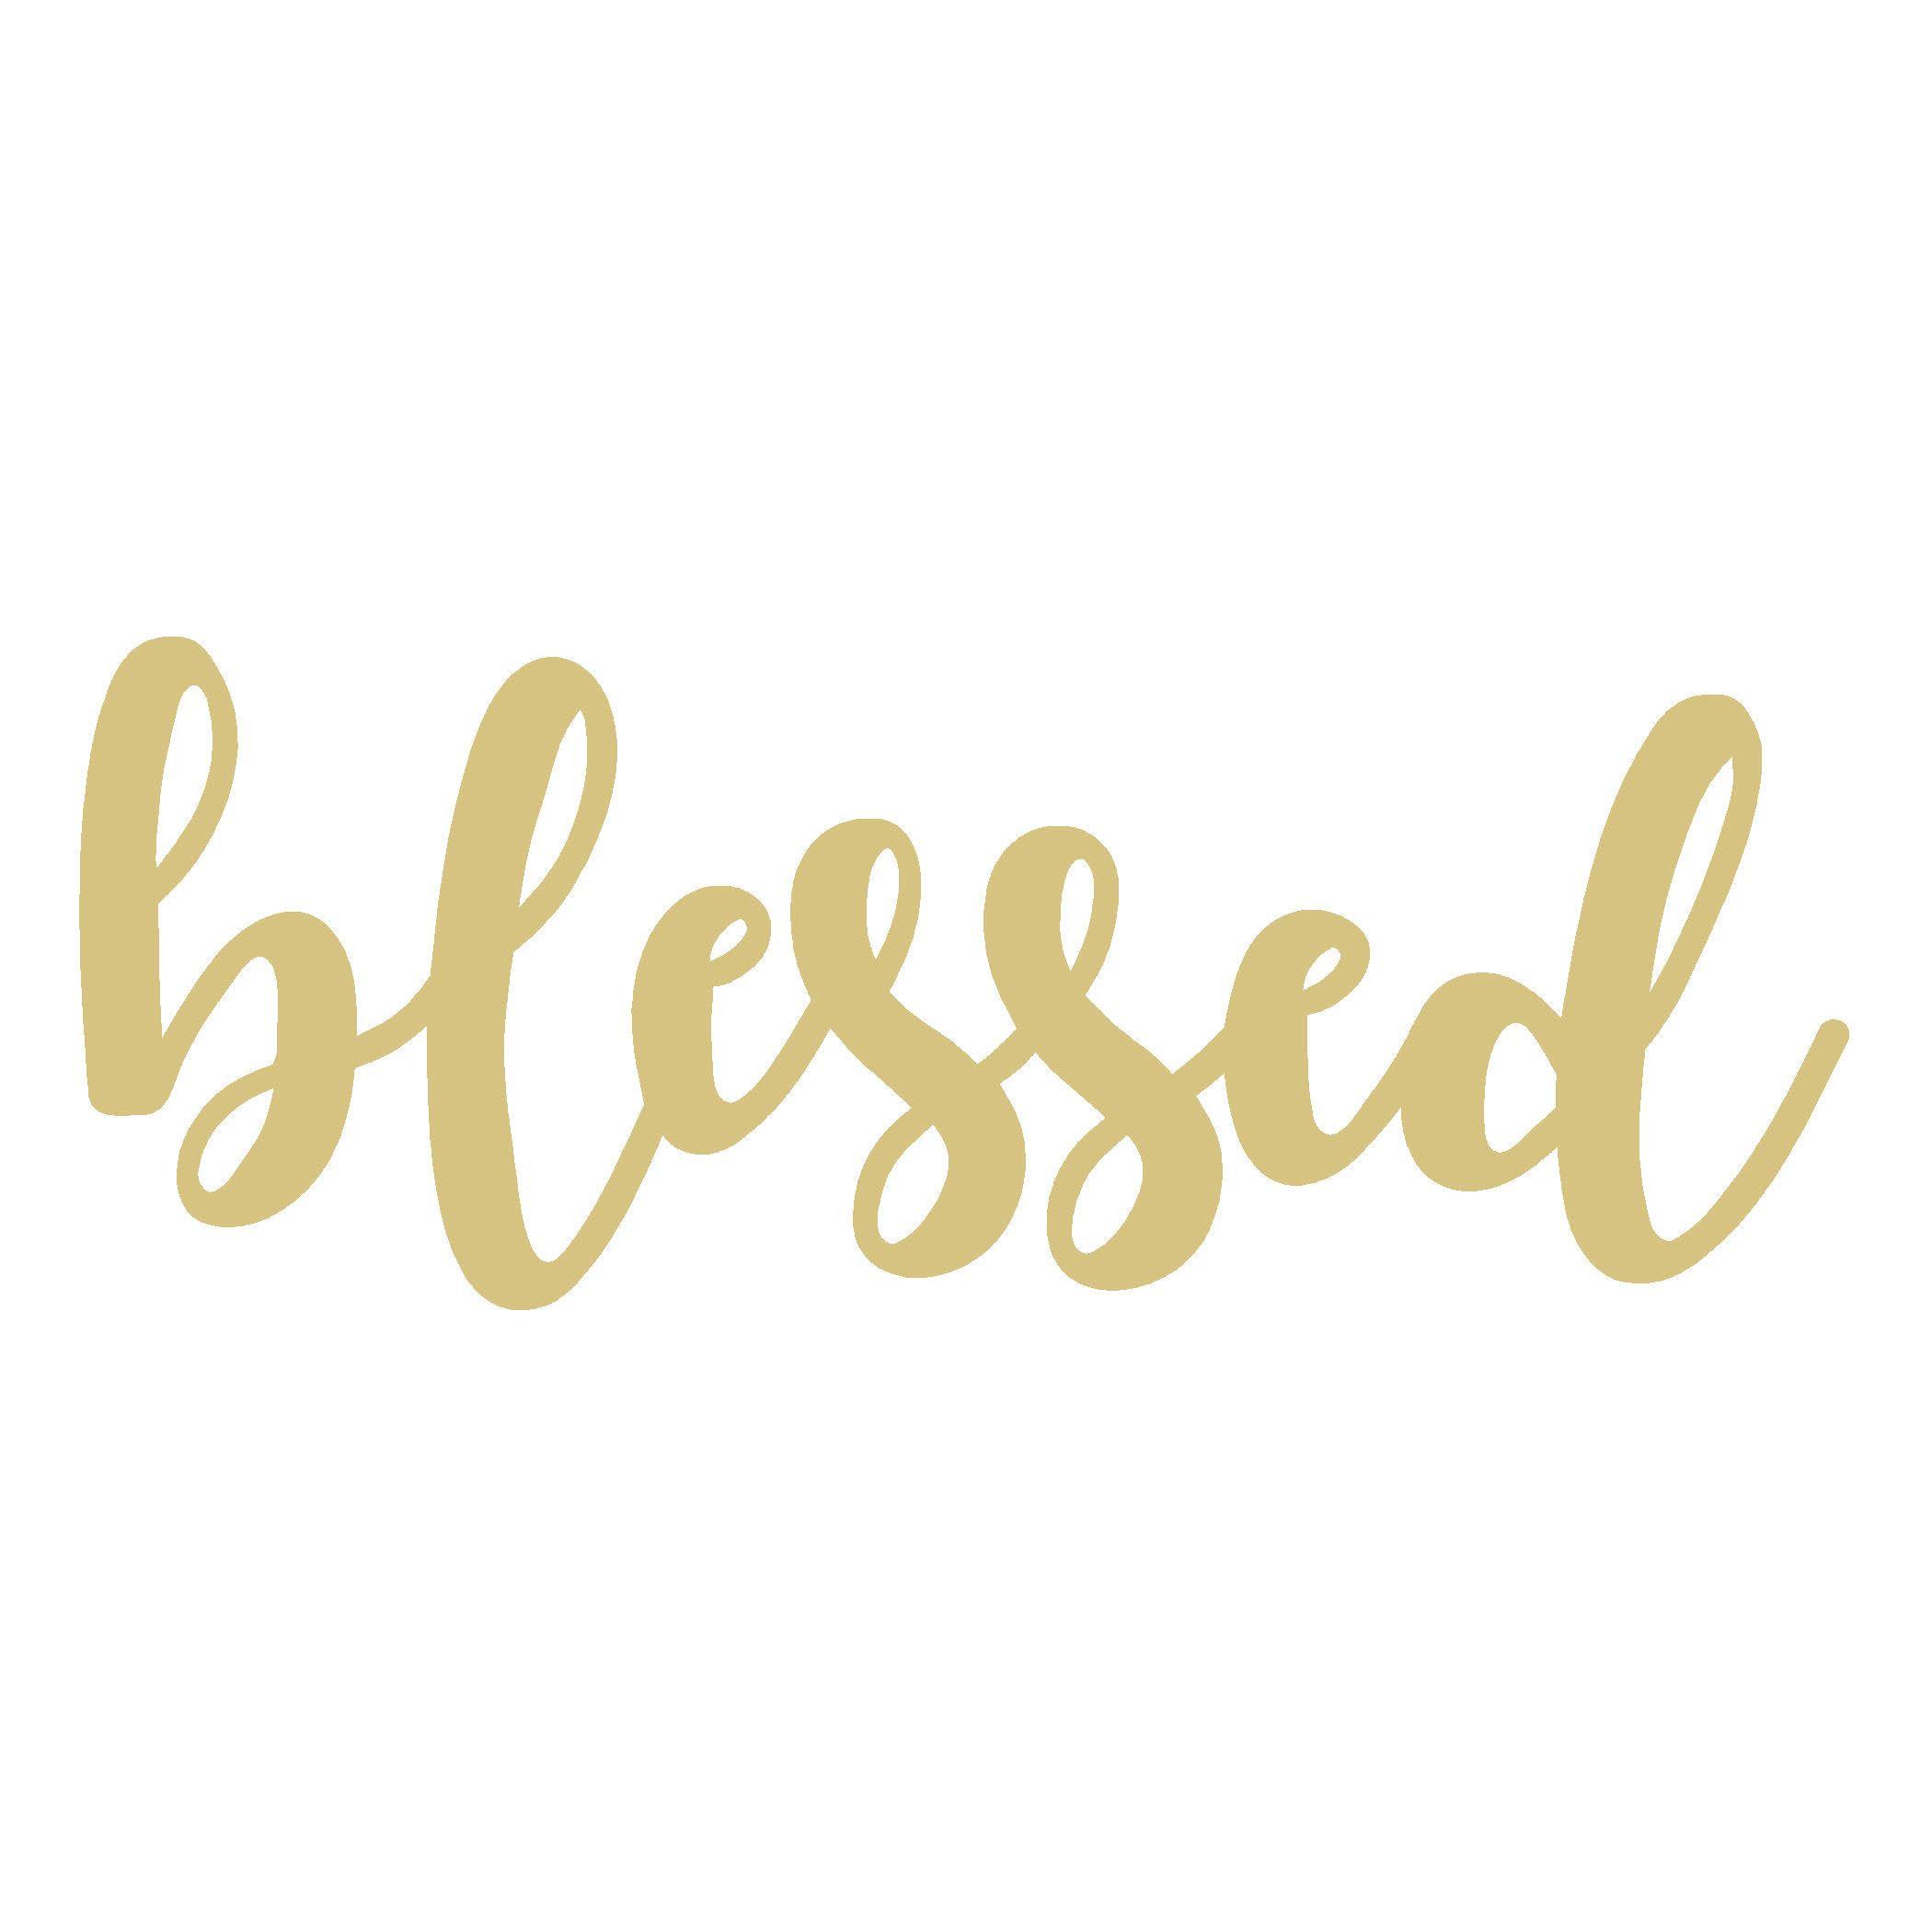 Blessed Logo - Word Blessed Cutout Style 2